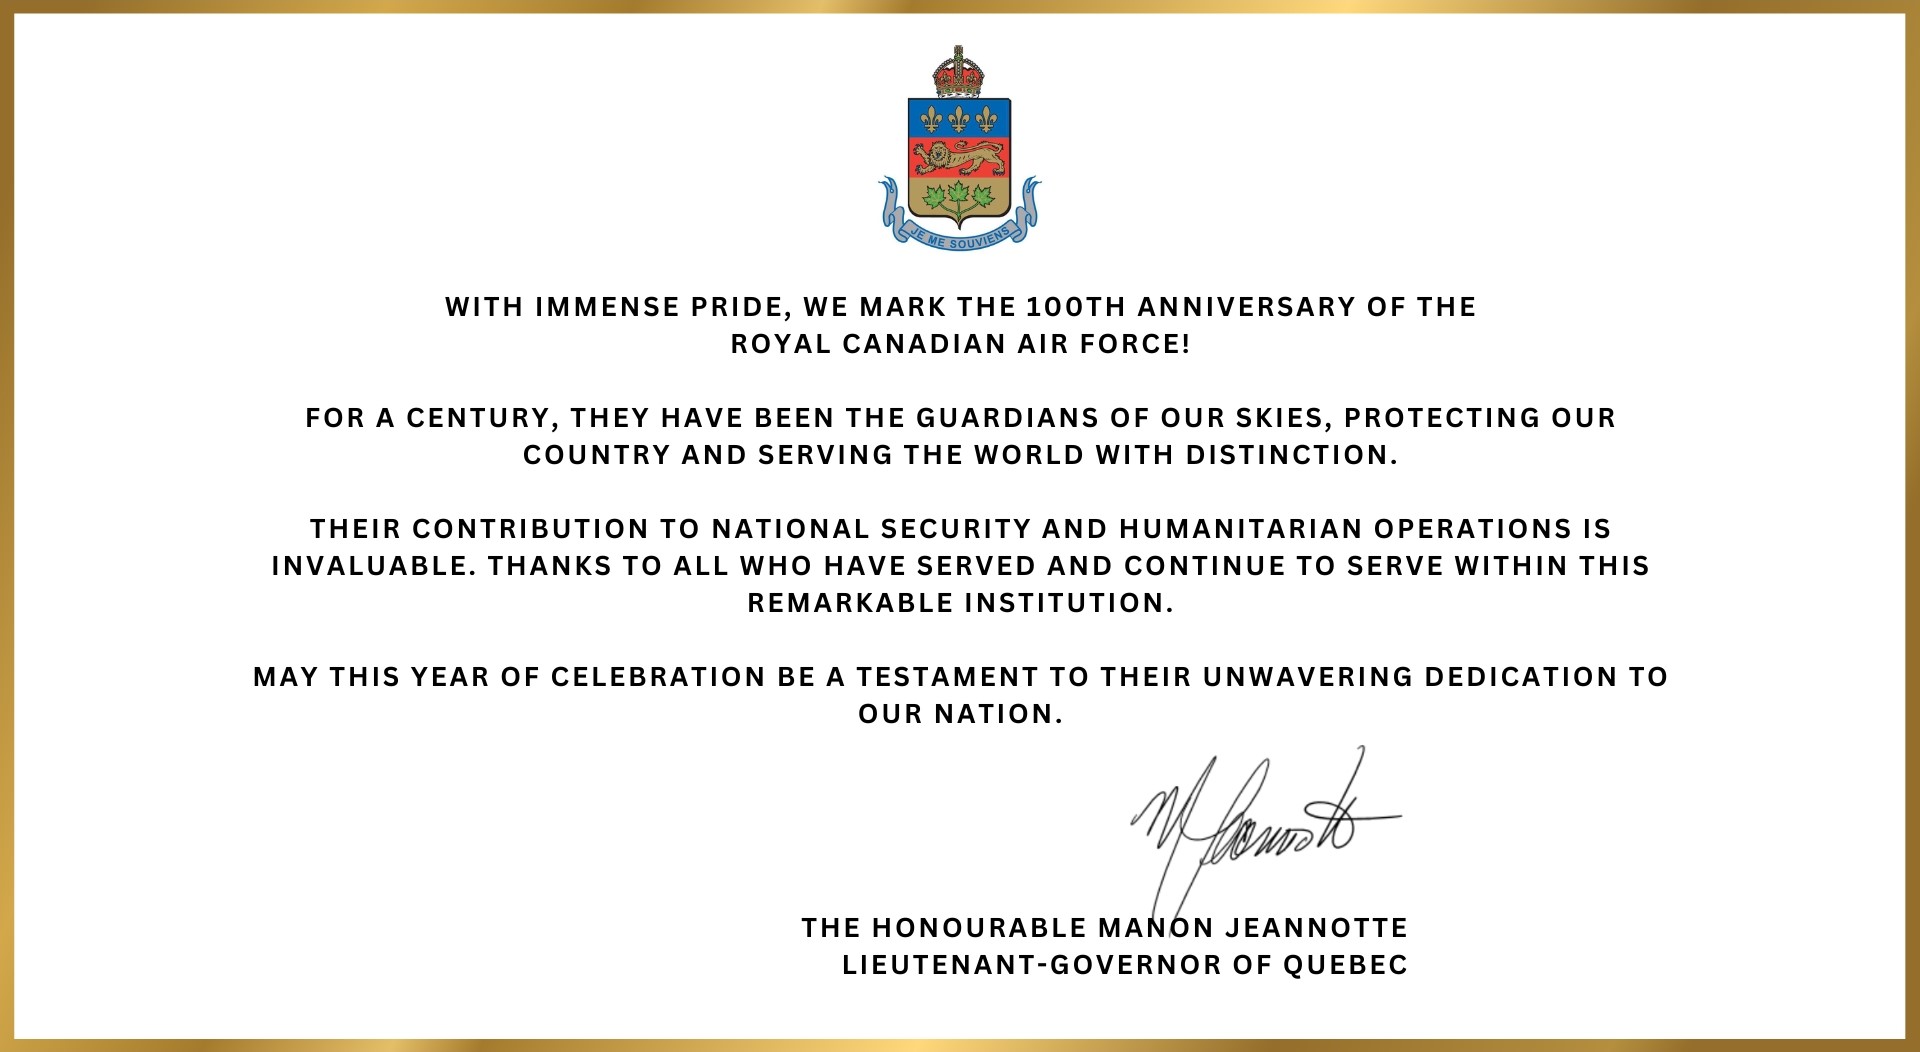 Message from the Lieutenant-Governor of Quebec to mark the 100th anniversary of the Royal Canadian Air Force

